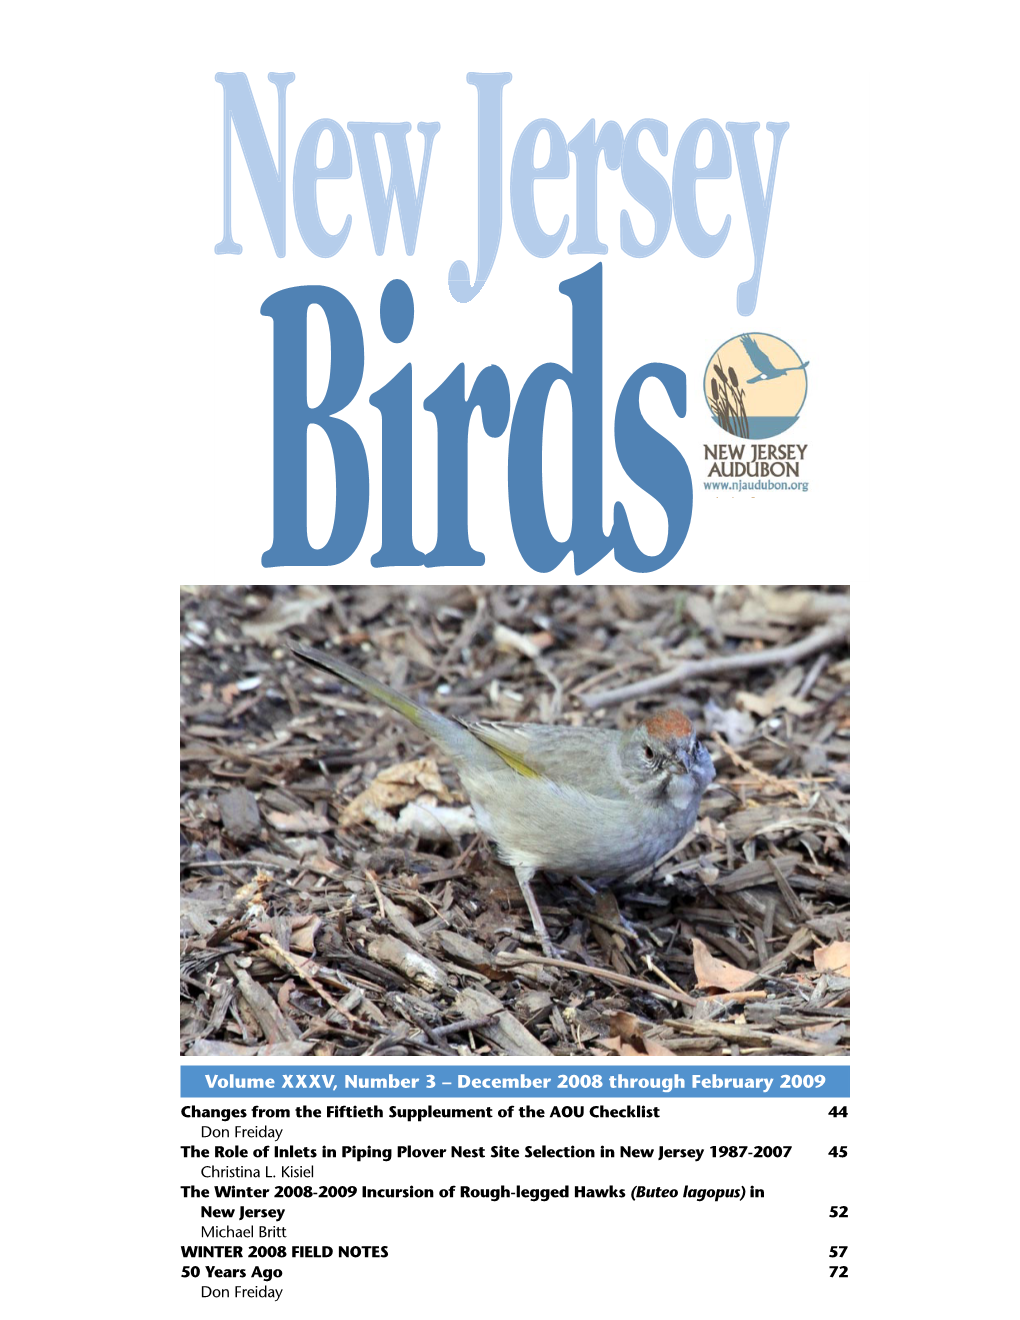 The Role of Inlets in Piping Plover Nest Site Selection in New Jersey 1987-2007 45 Christina L